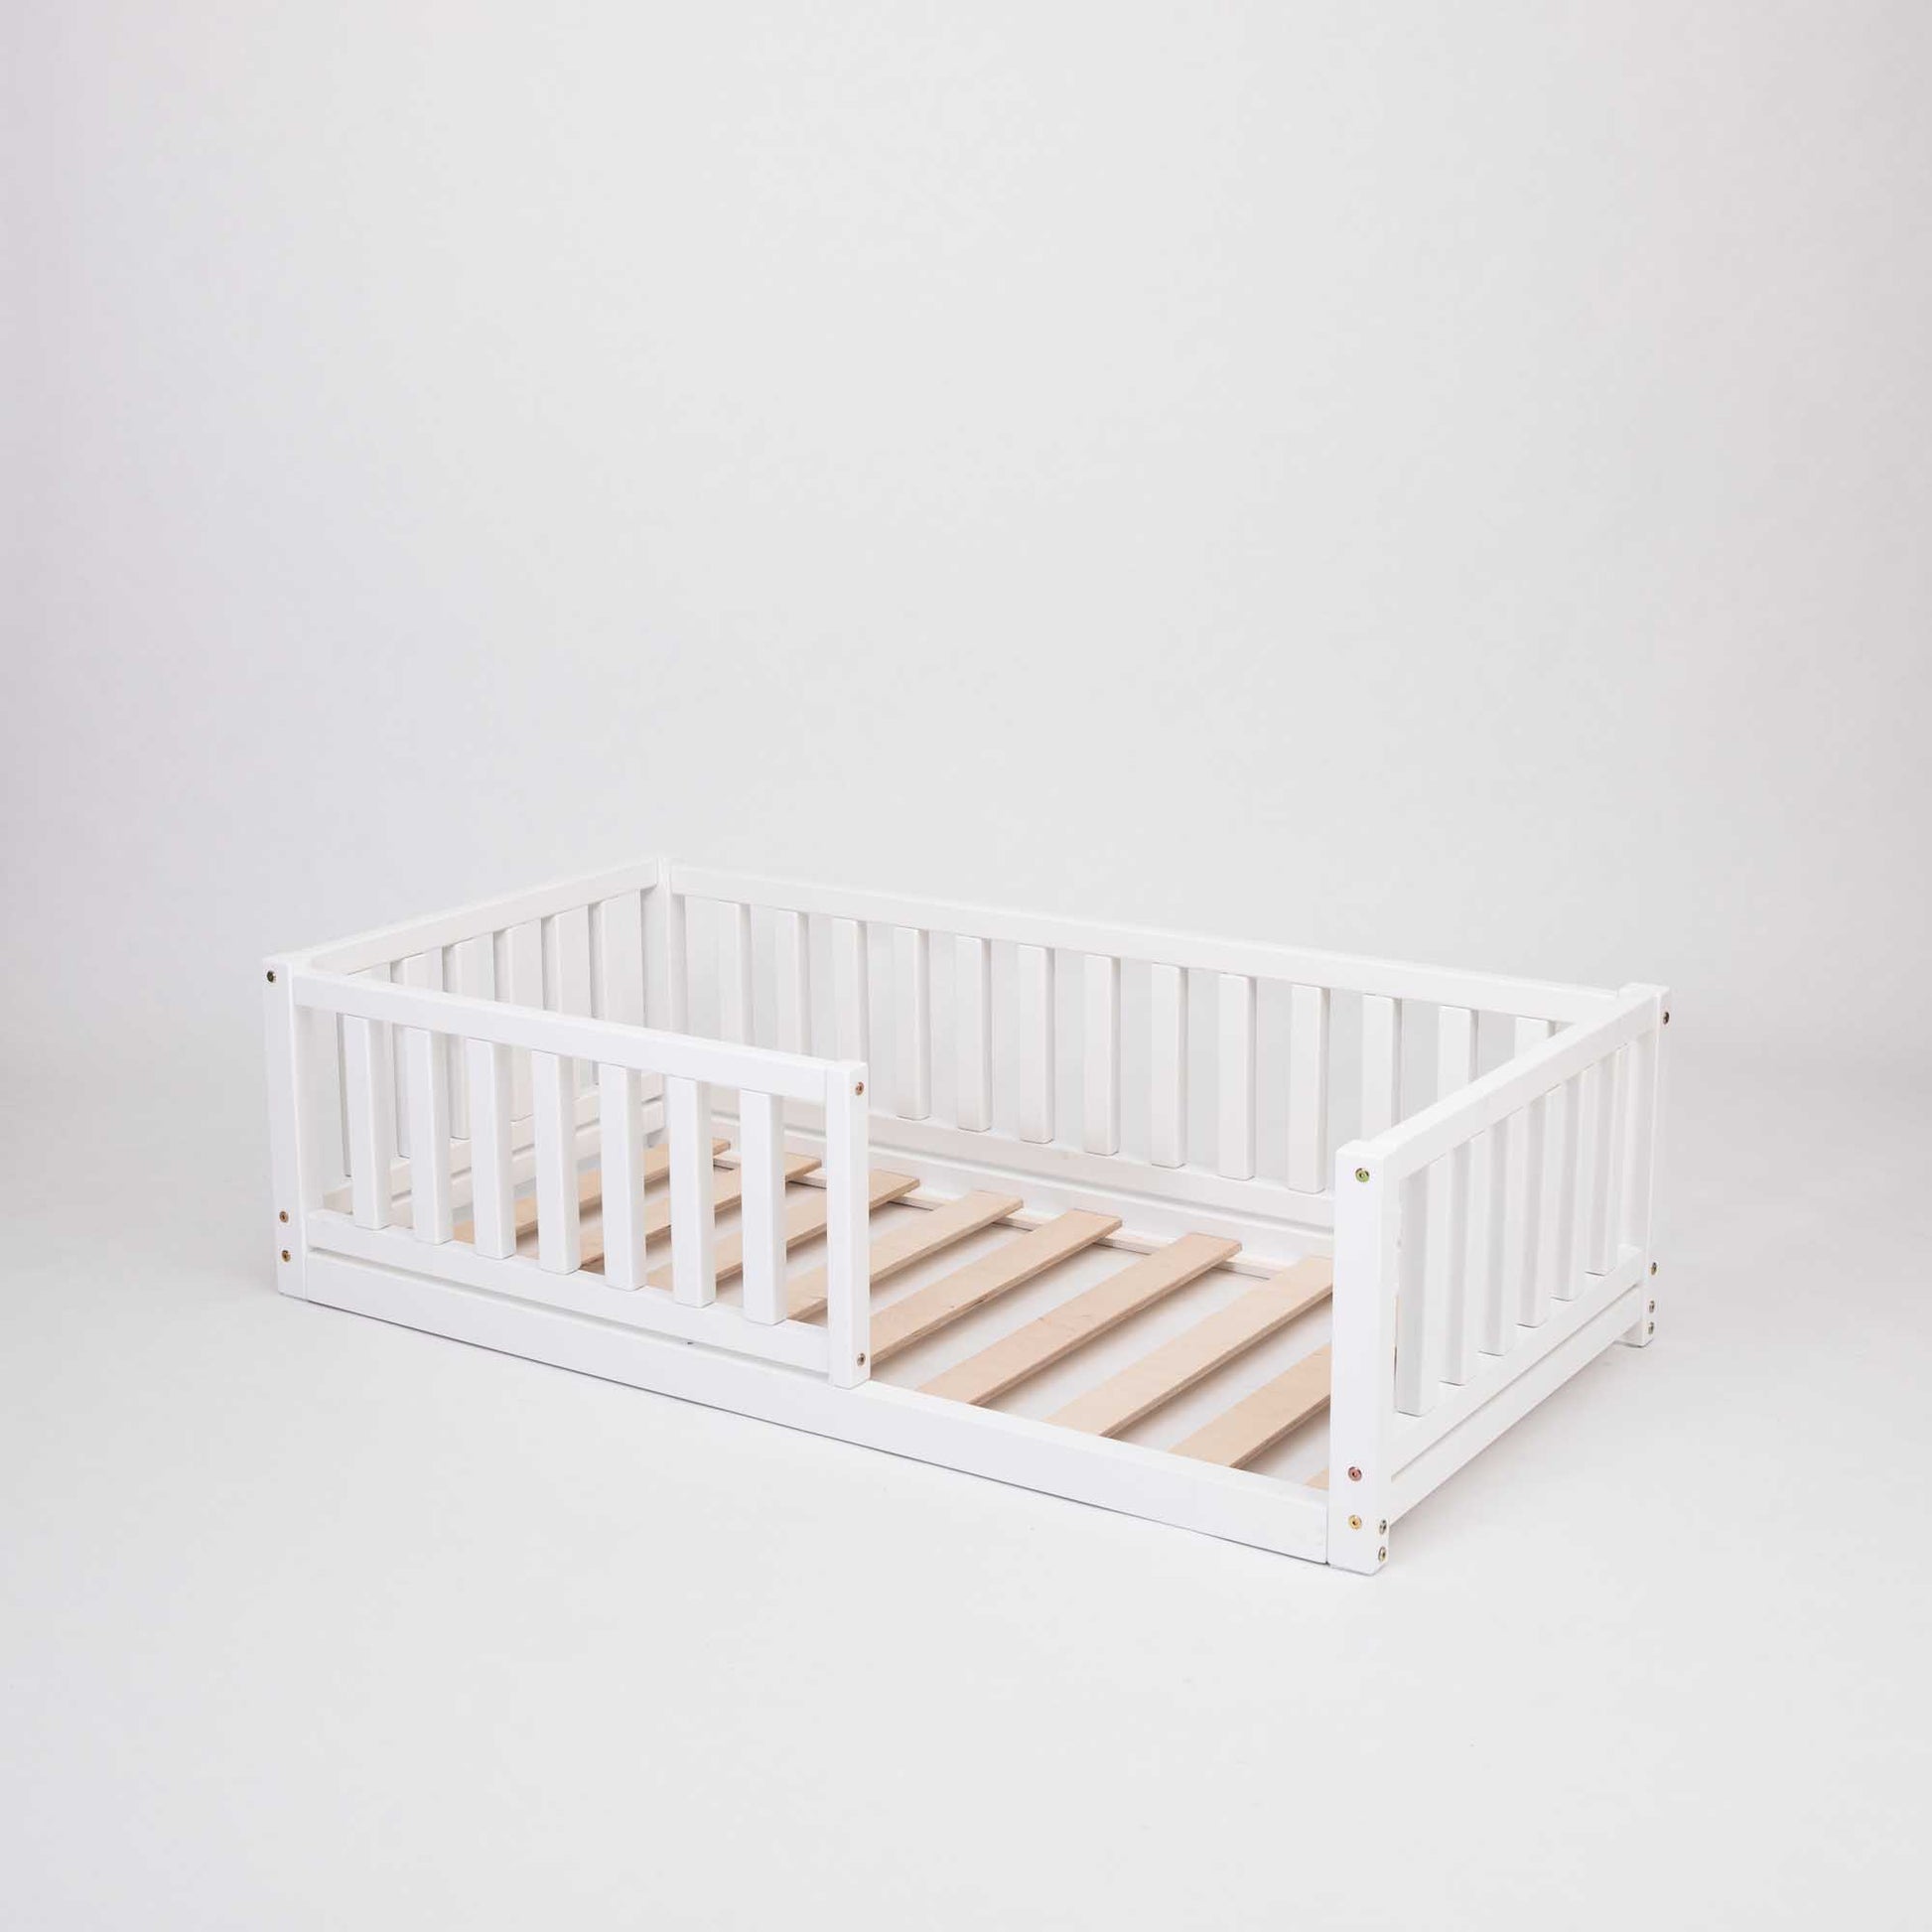 A Sweet Home From Wood Montessori kids' bed with a fence, designed to provide security and encourage independent sleeping.